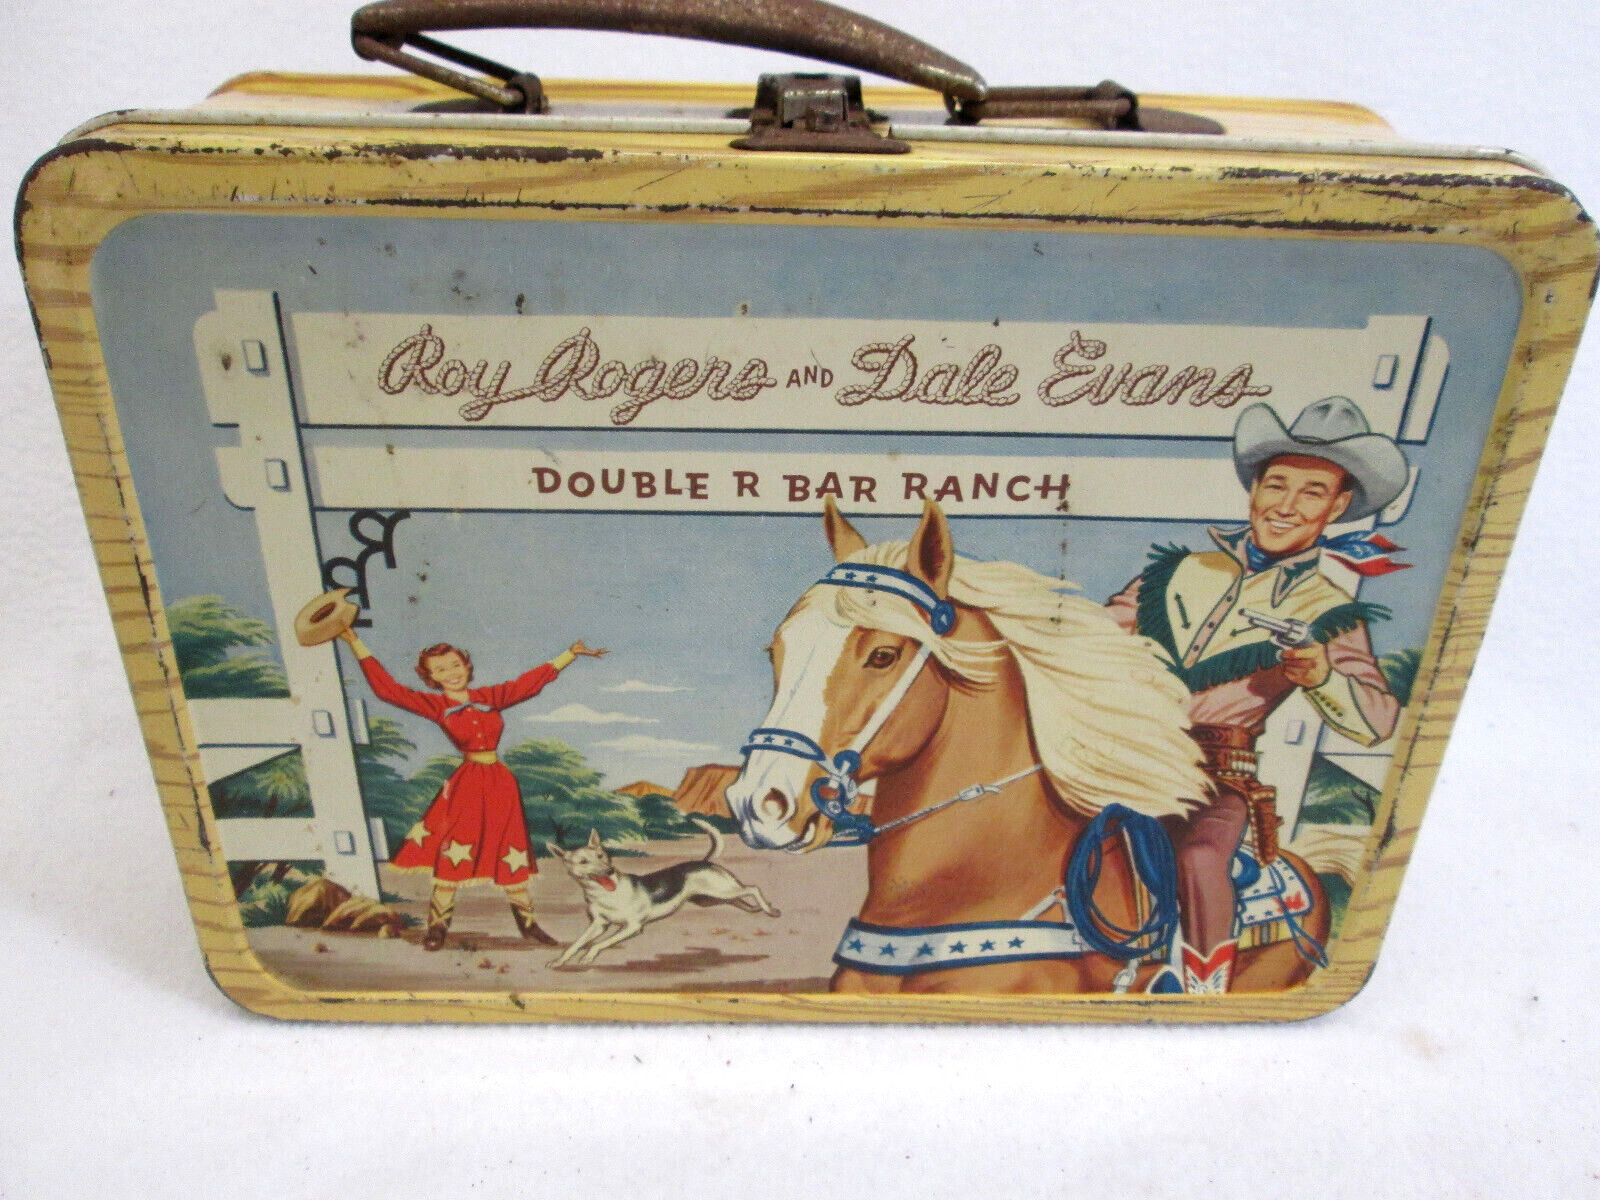 Vintage 1950\'s Roy Rogers & Dale Evans Double R Bar Ranch metal lunch box